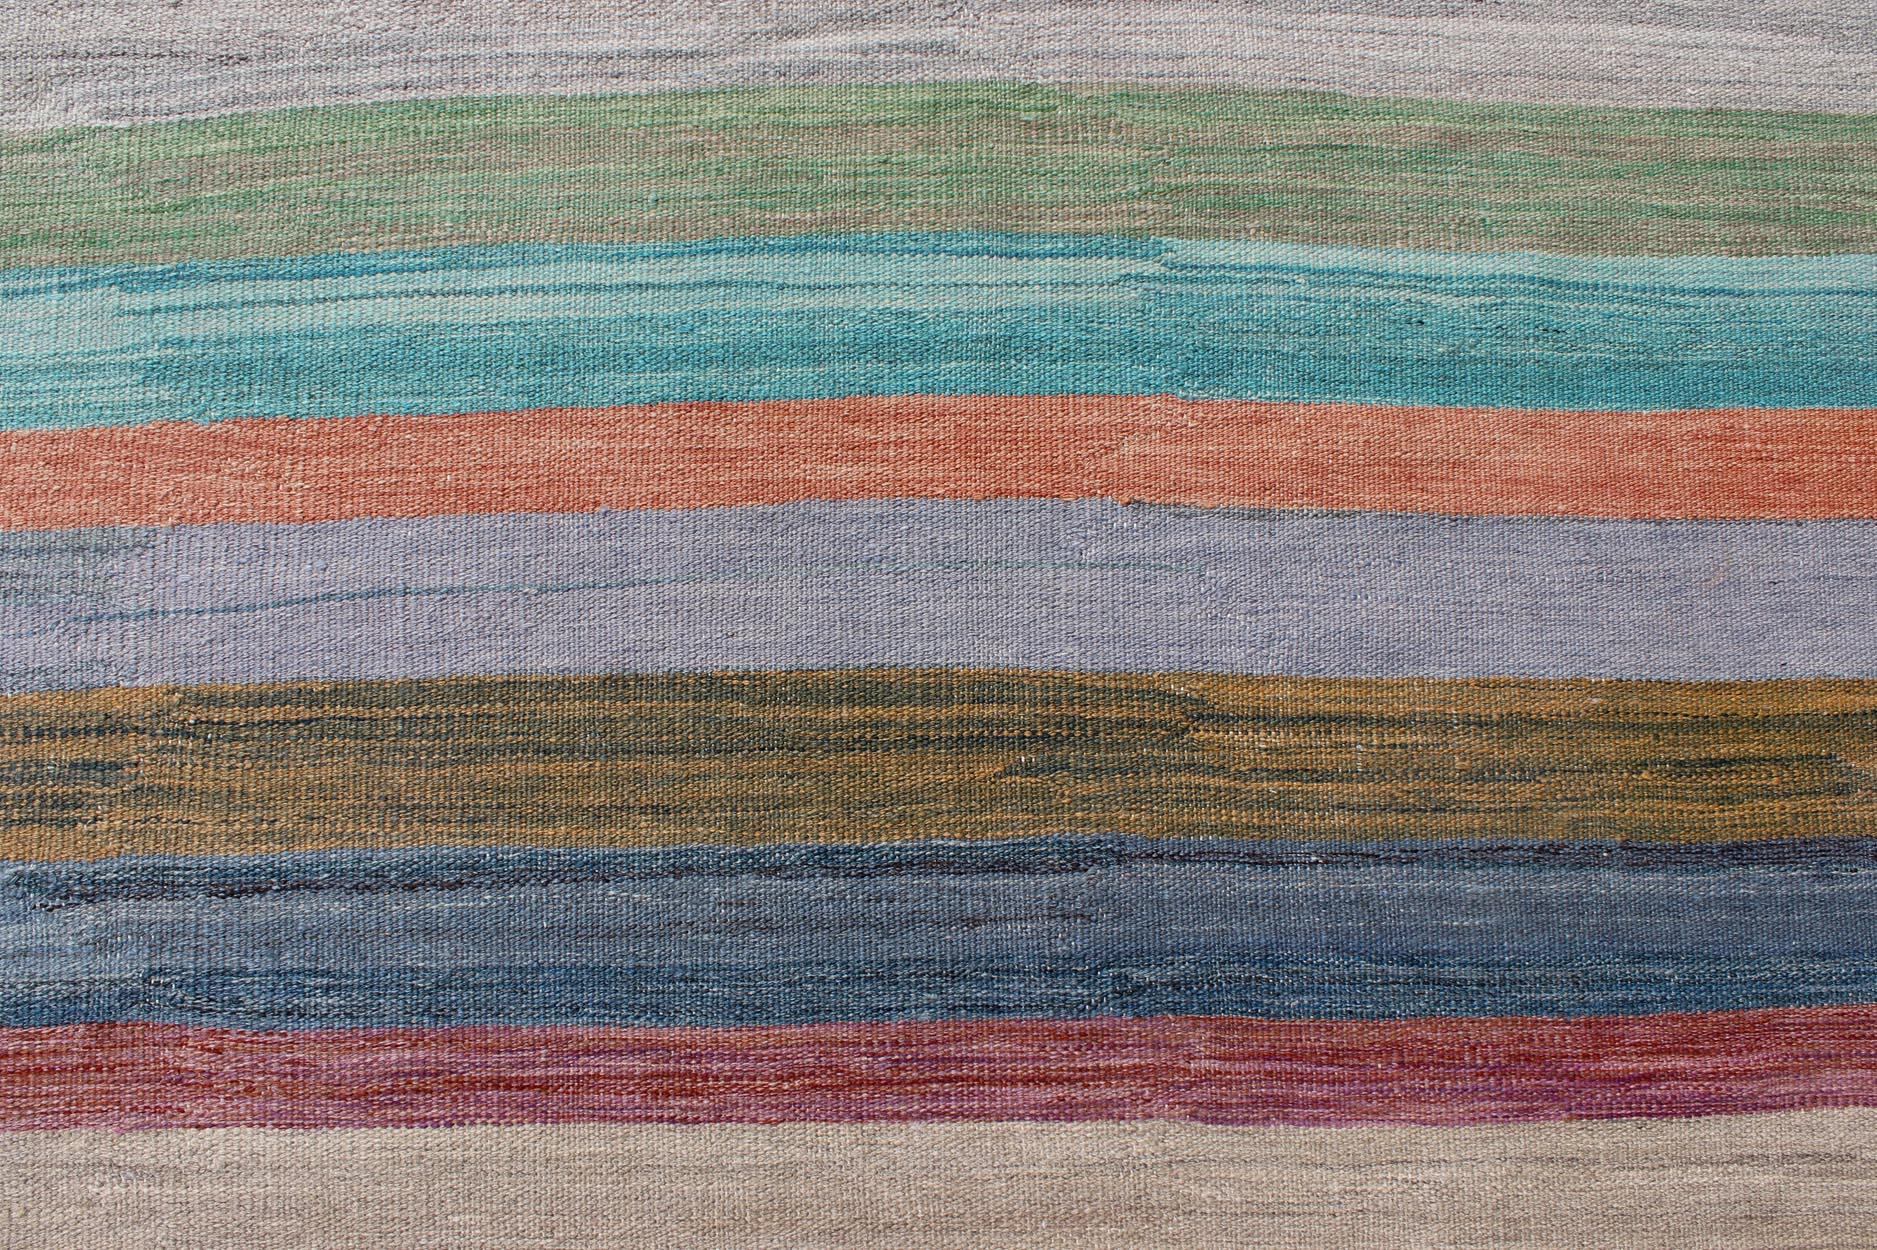 Wool Colorful Flat-Weave Modern Kilim Rug with Classic Stripes for Modern Interiors